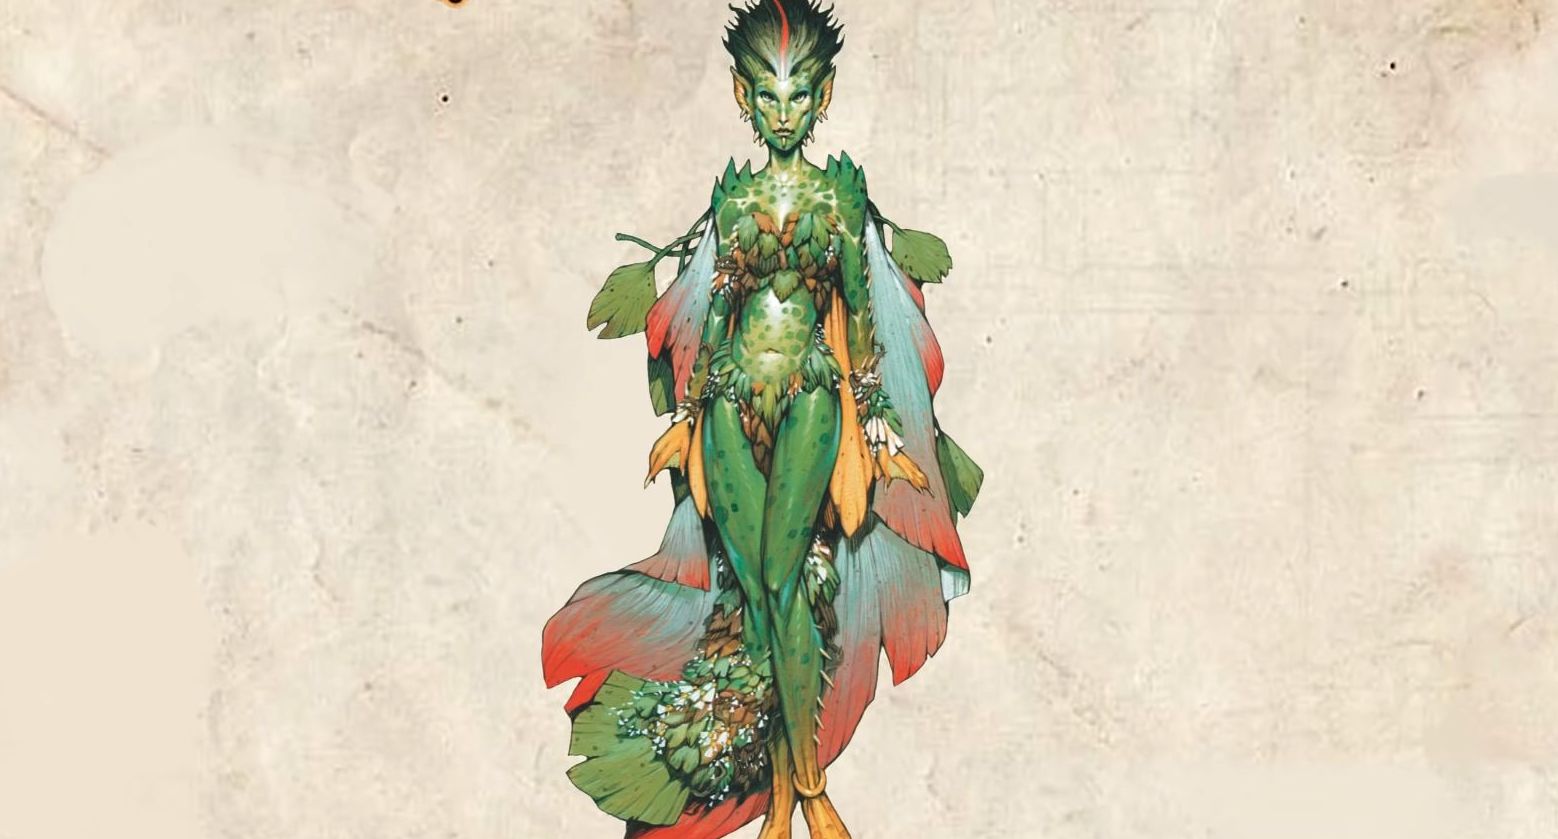 A green plant woman covered in leaves